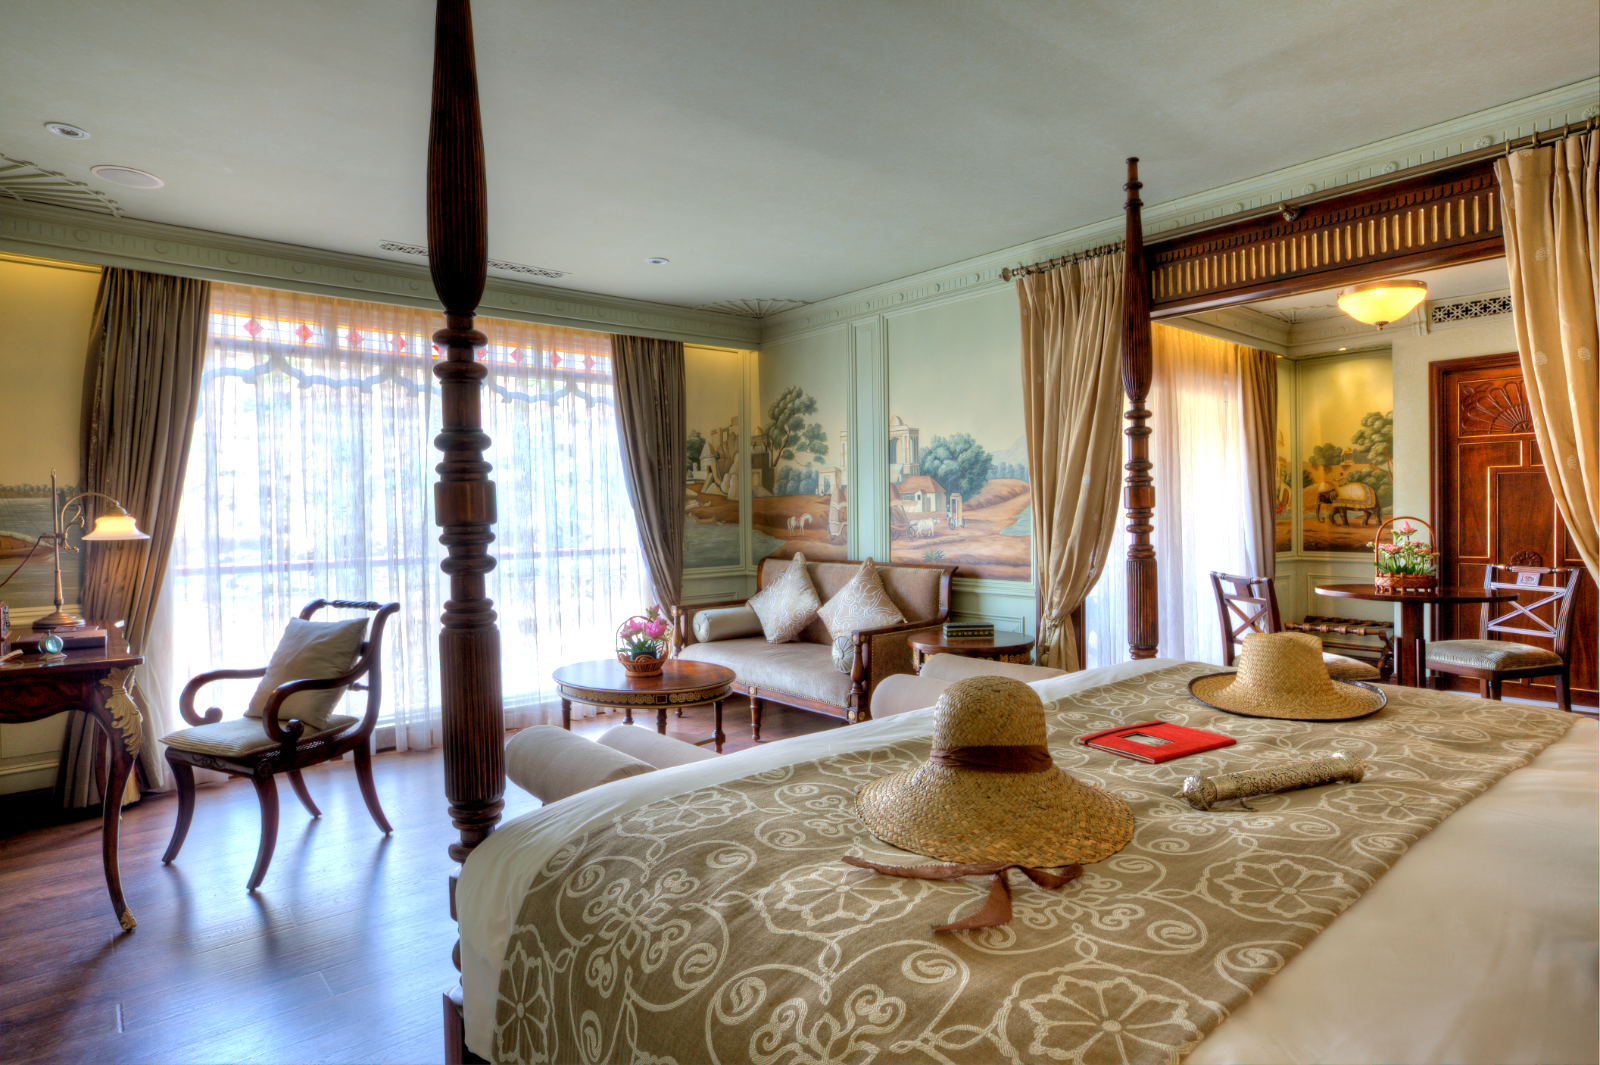 Lord Byron Suite onboard The Jahan Mekong River cruise in Vietnam